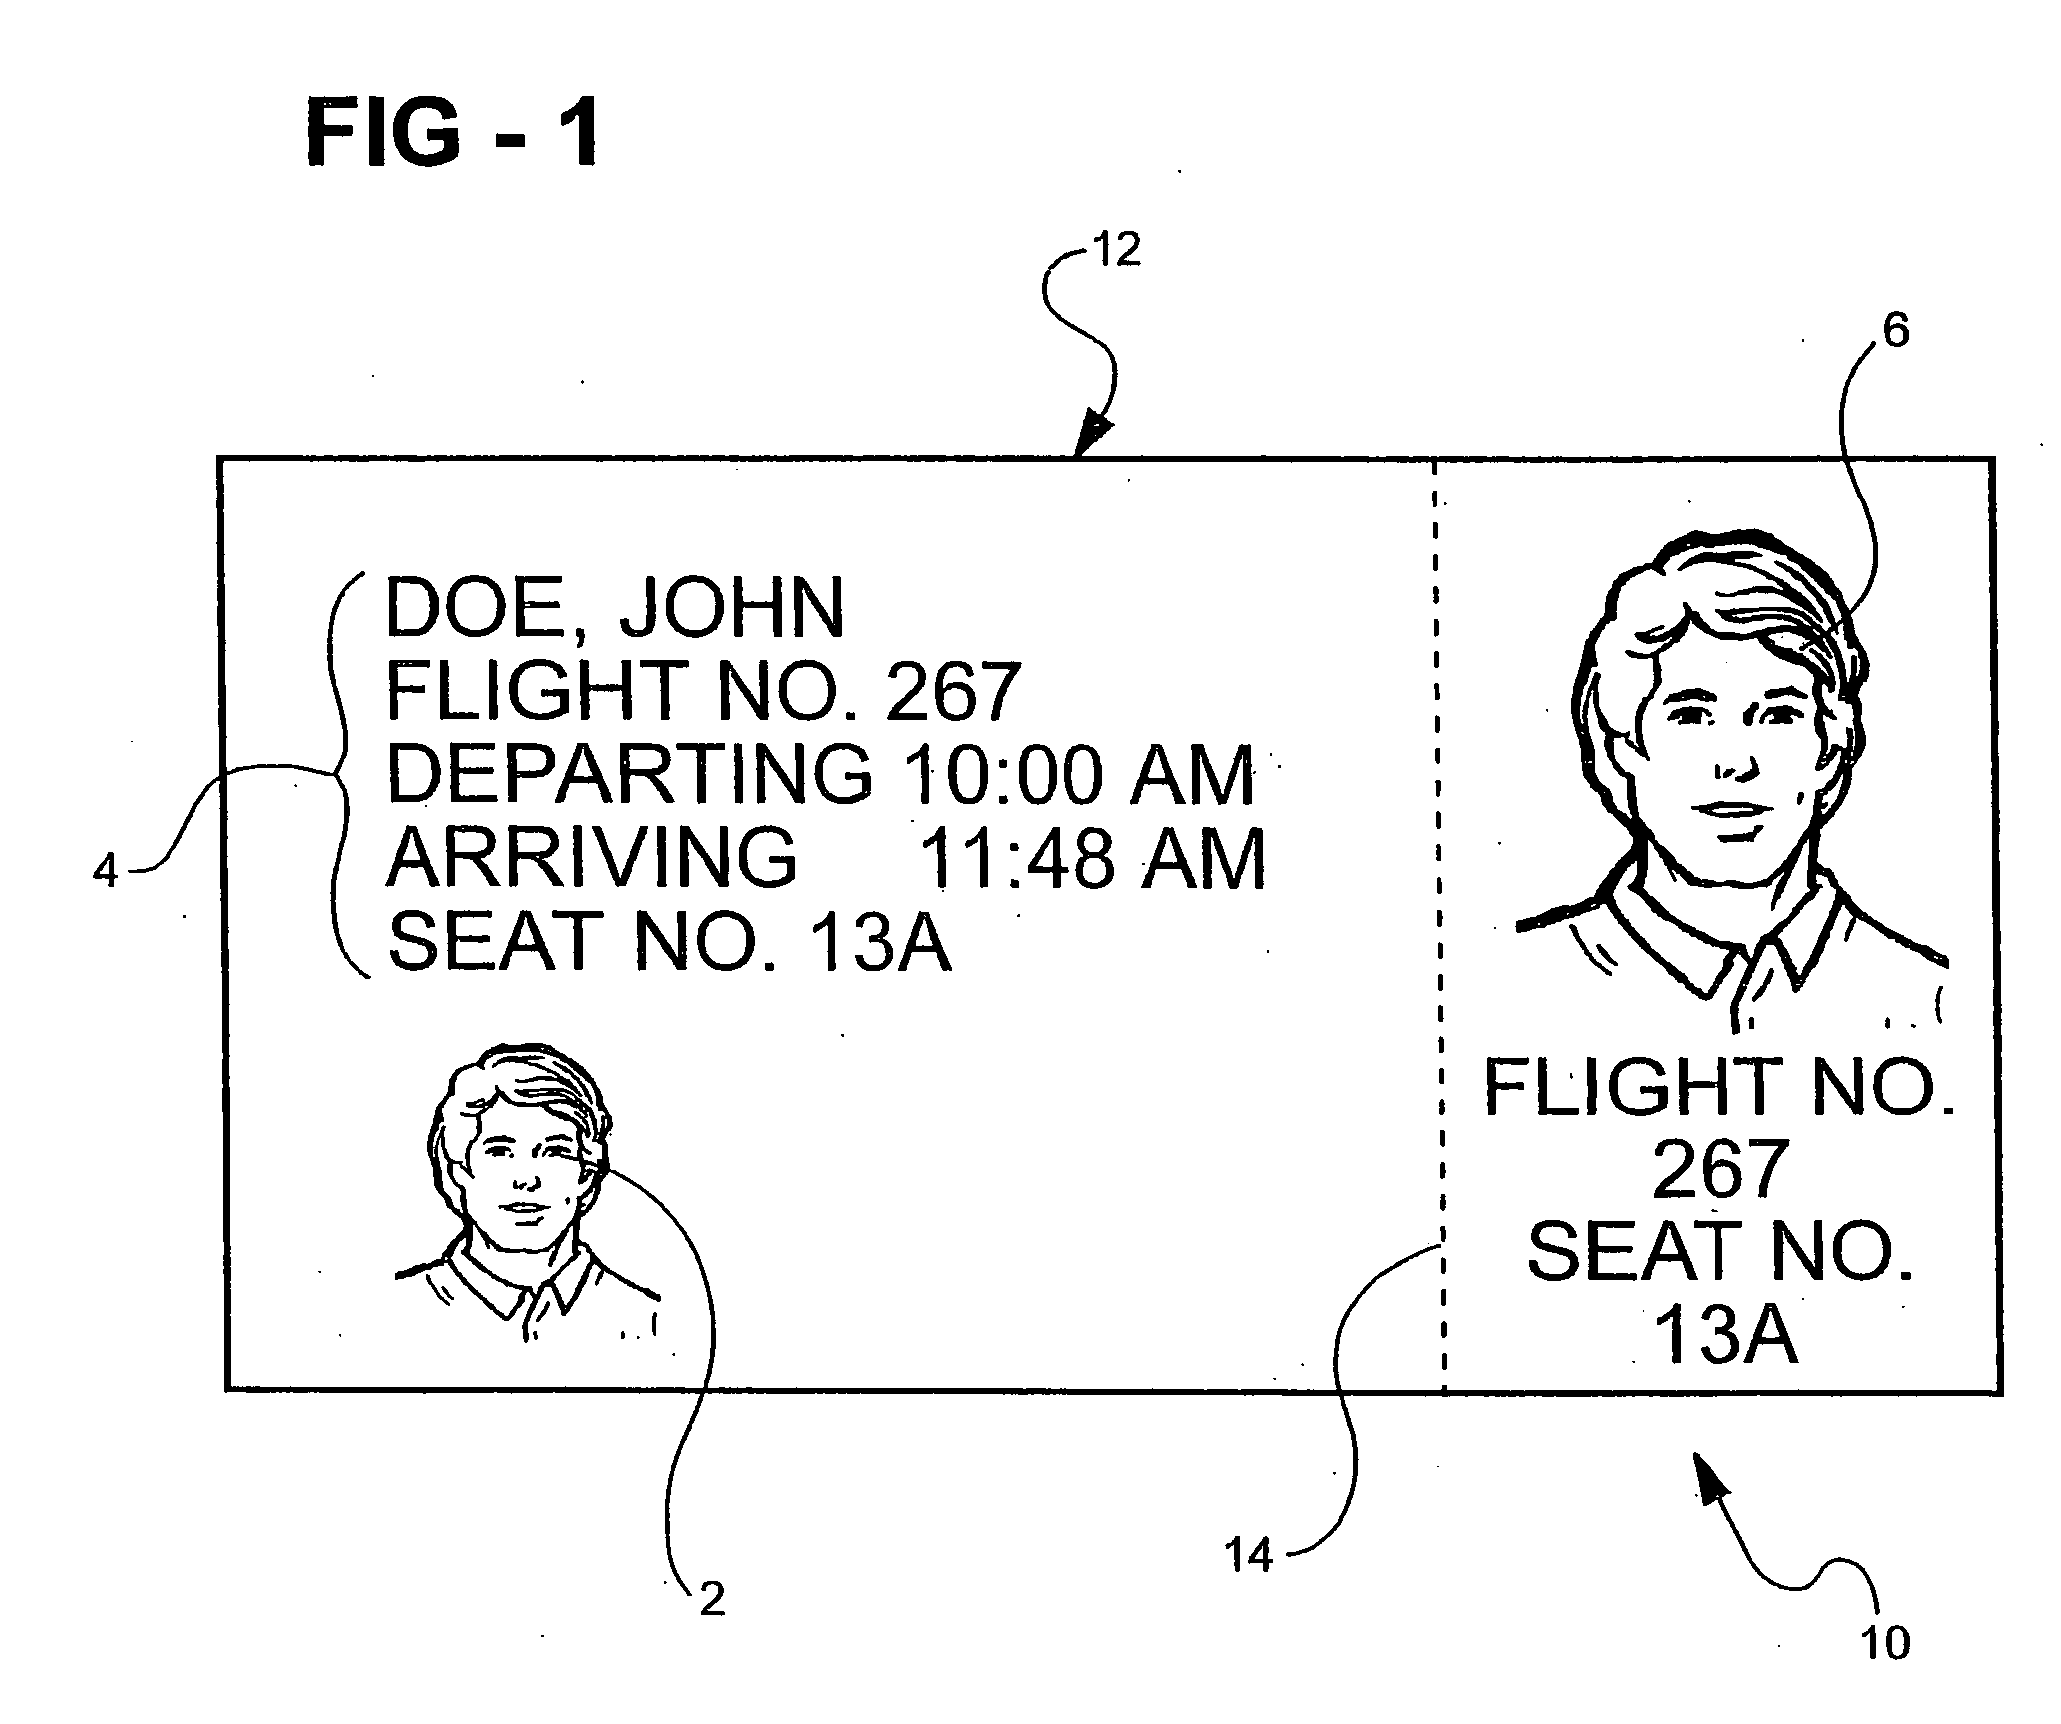 User authorization system containing a user image